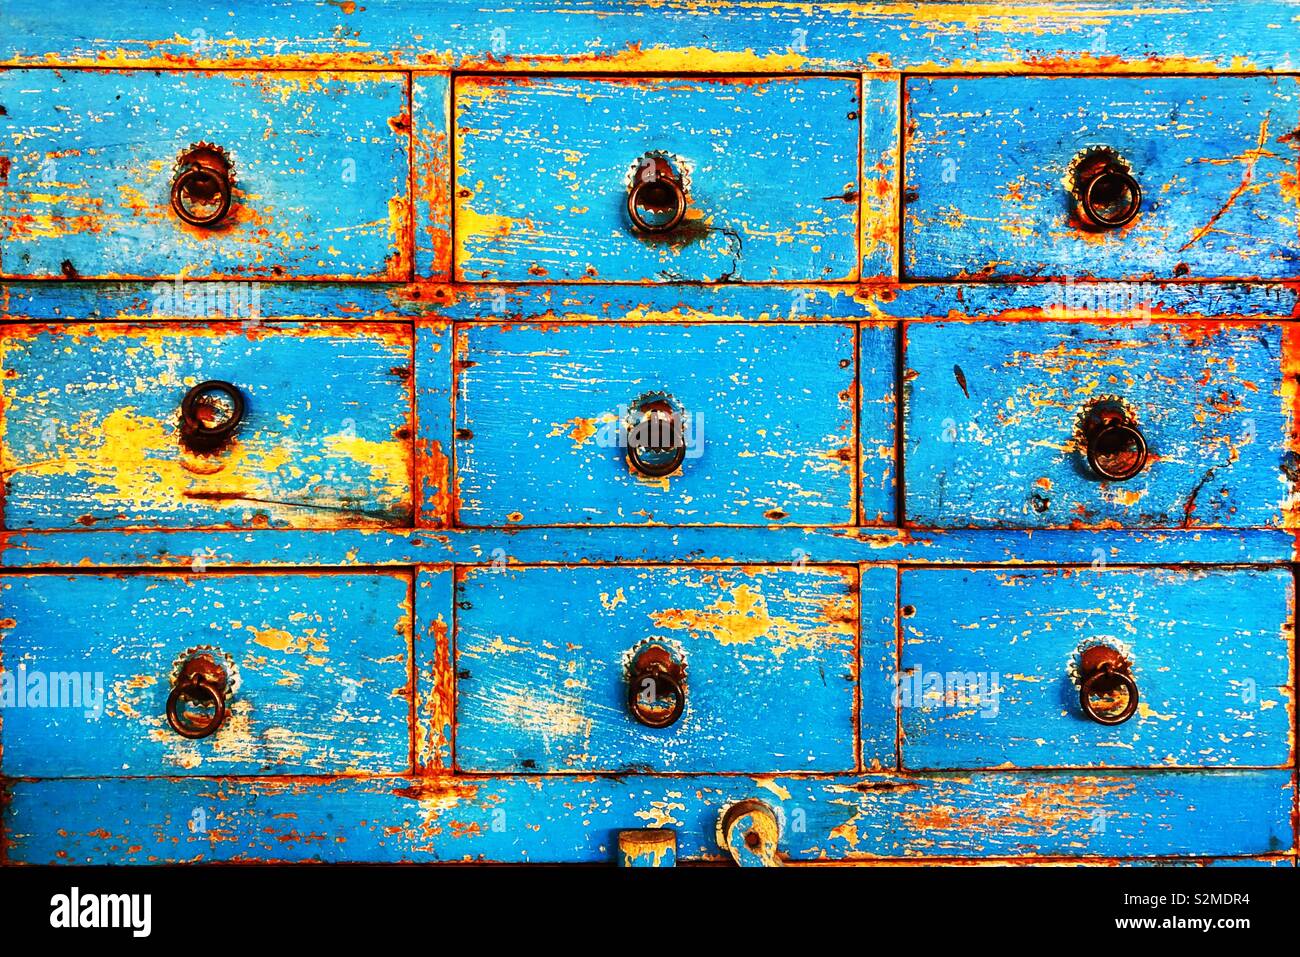 Chest of drawers with blue flaking paint and metal handles. Stock Photo